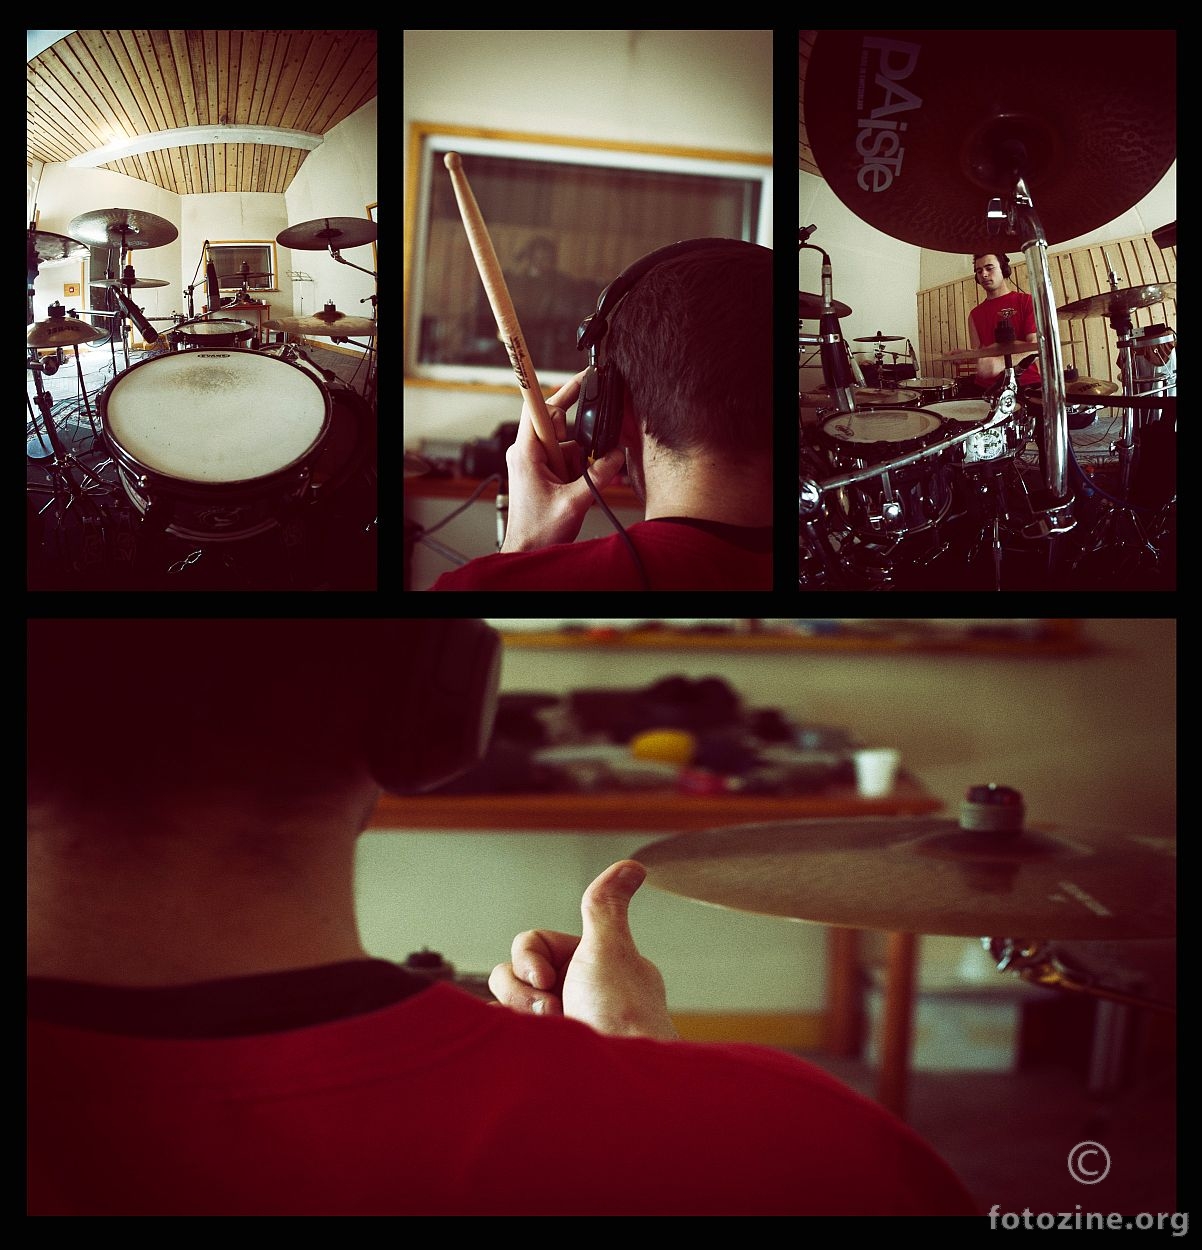 Recording session: Drums